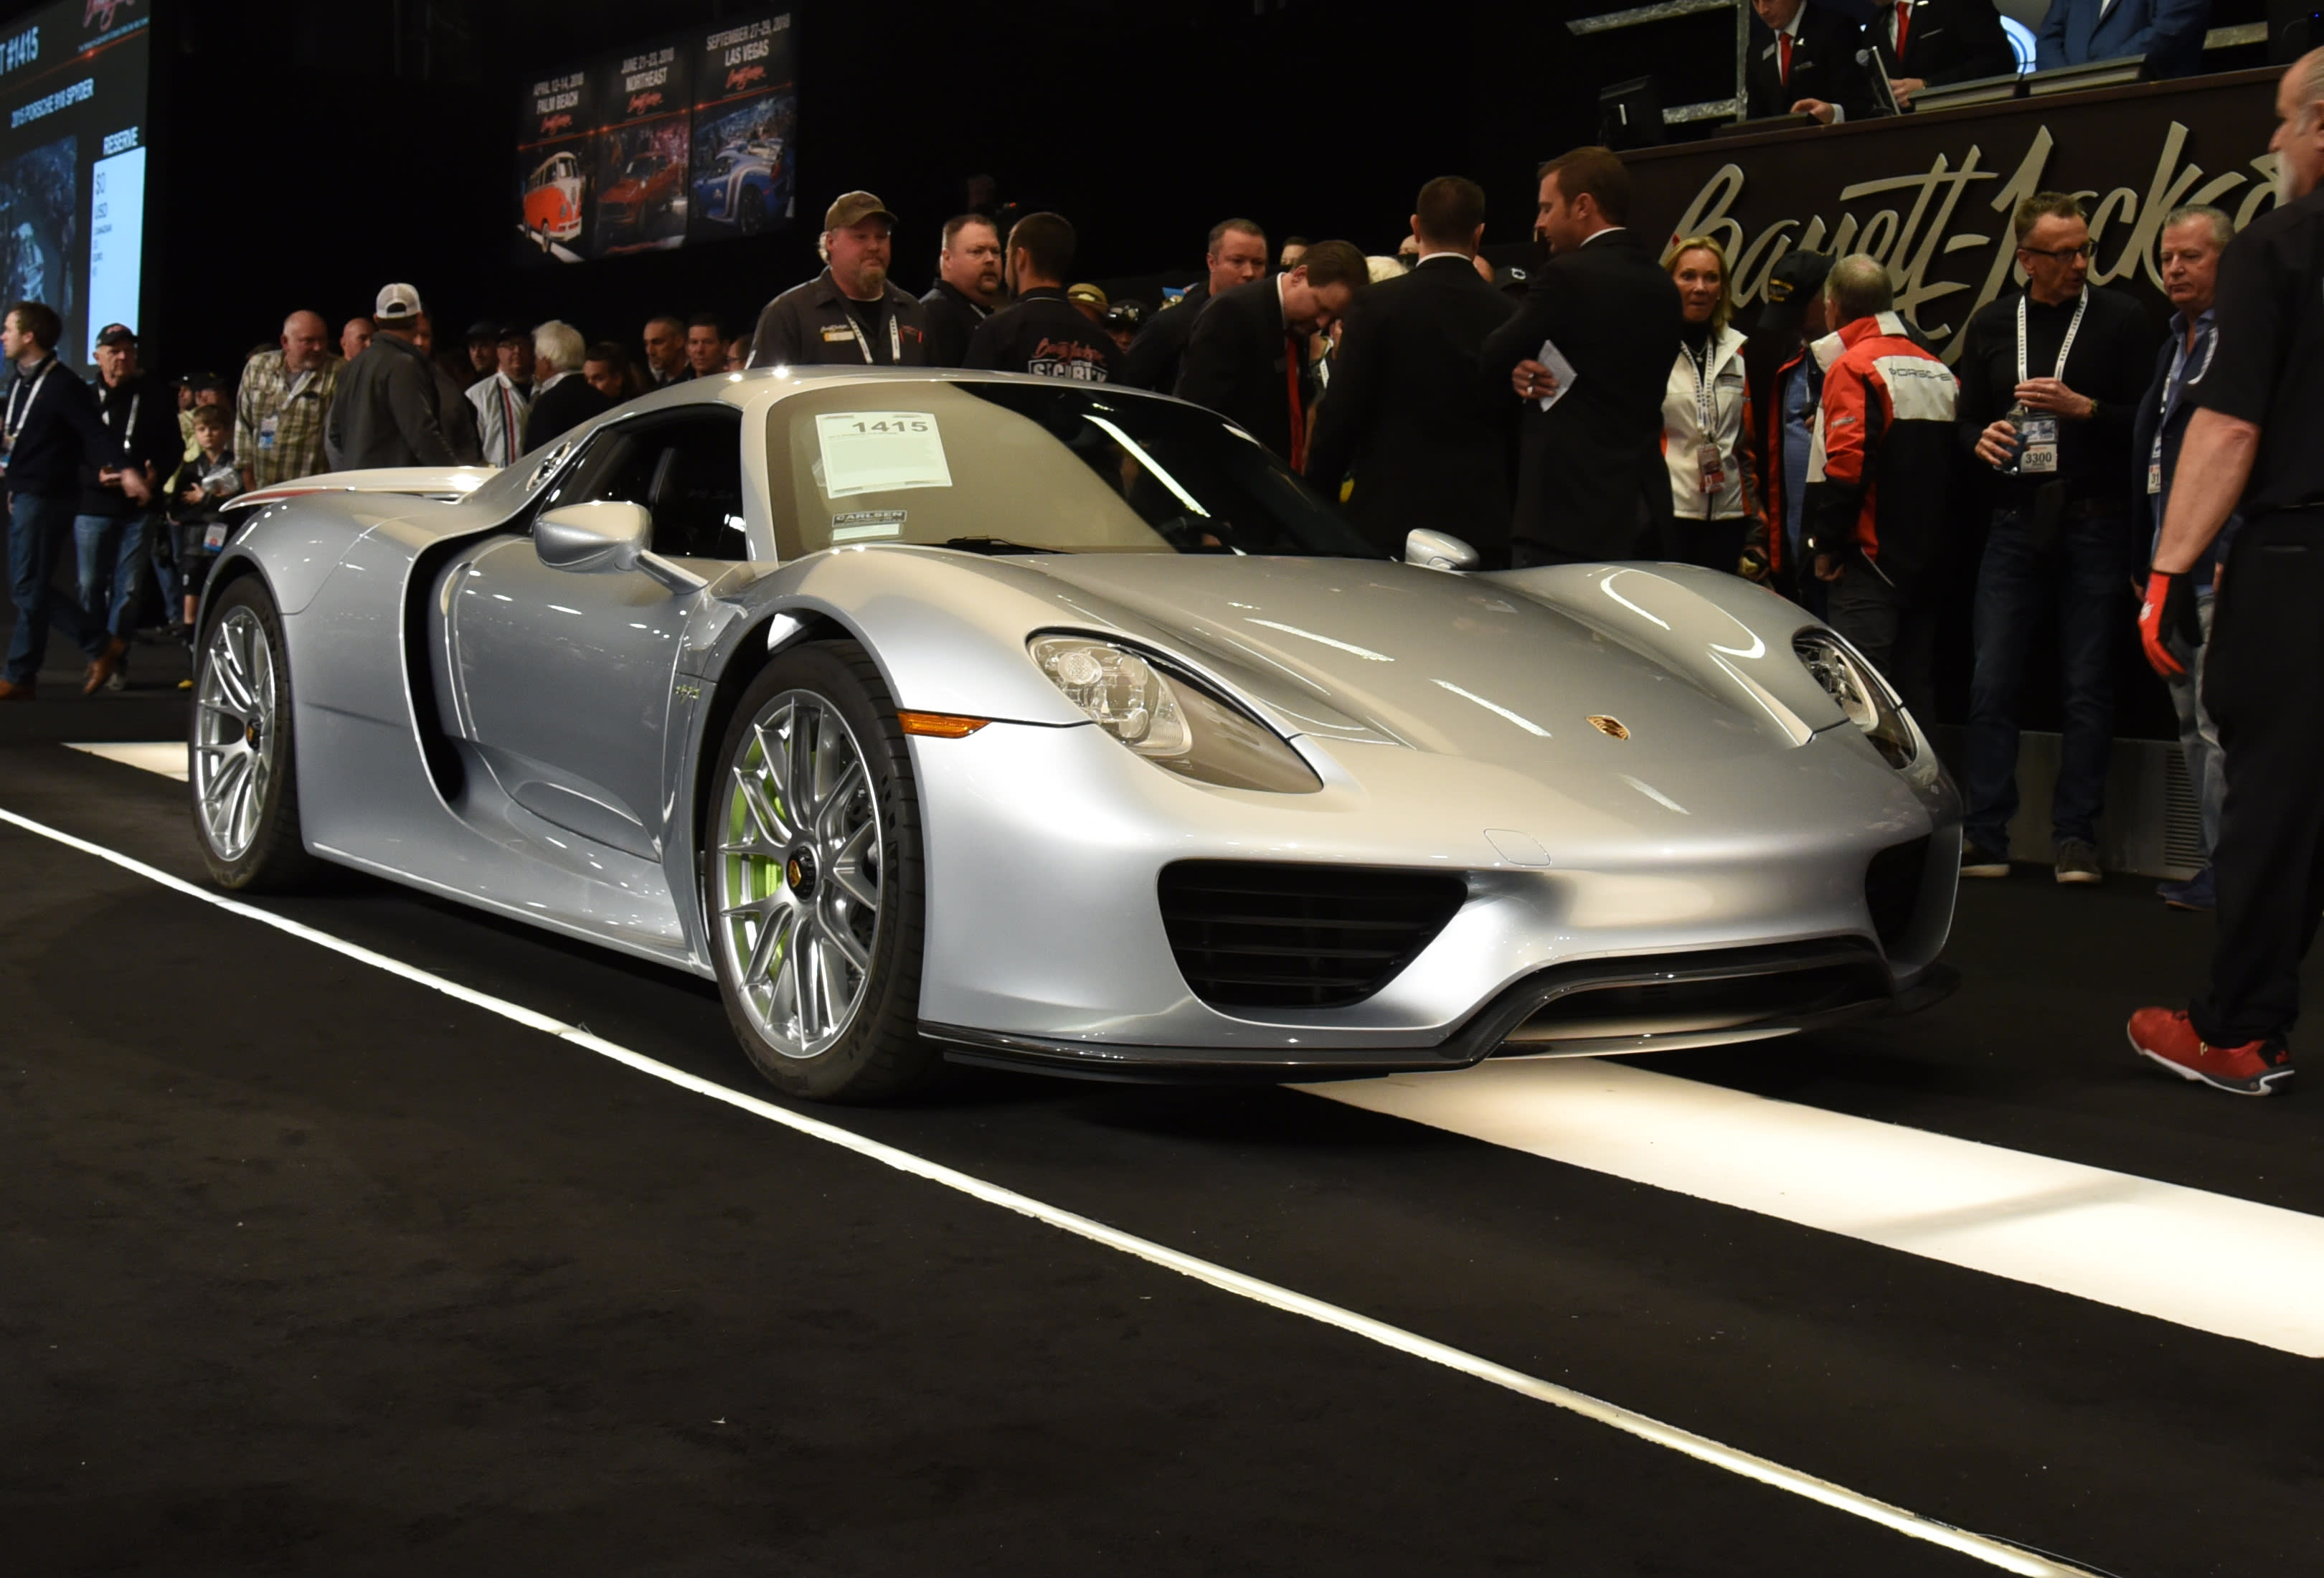 The 10 Most Expensive Vehicles Sold at BarrettJackson’s Auction